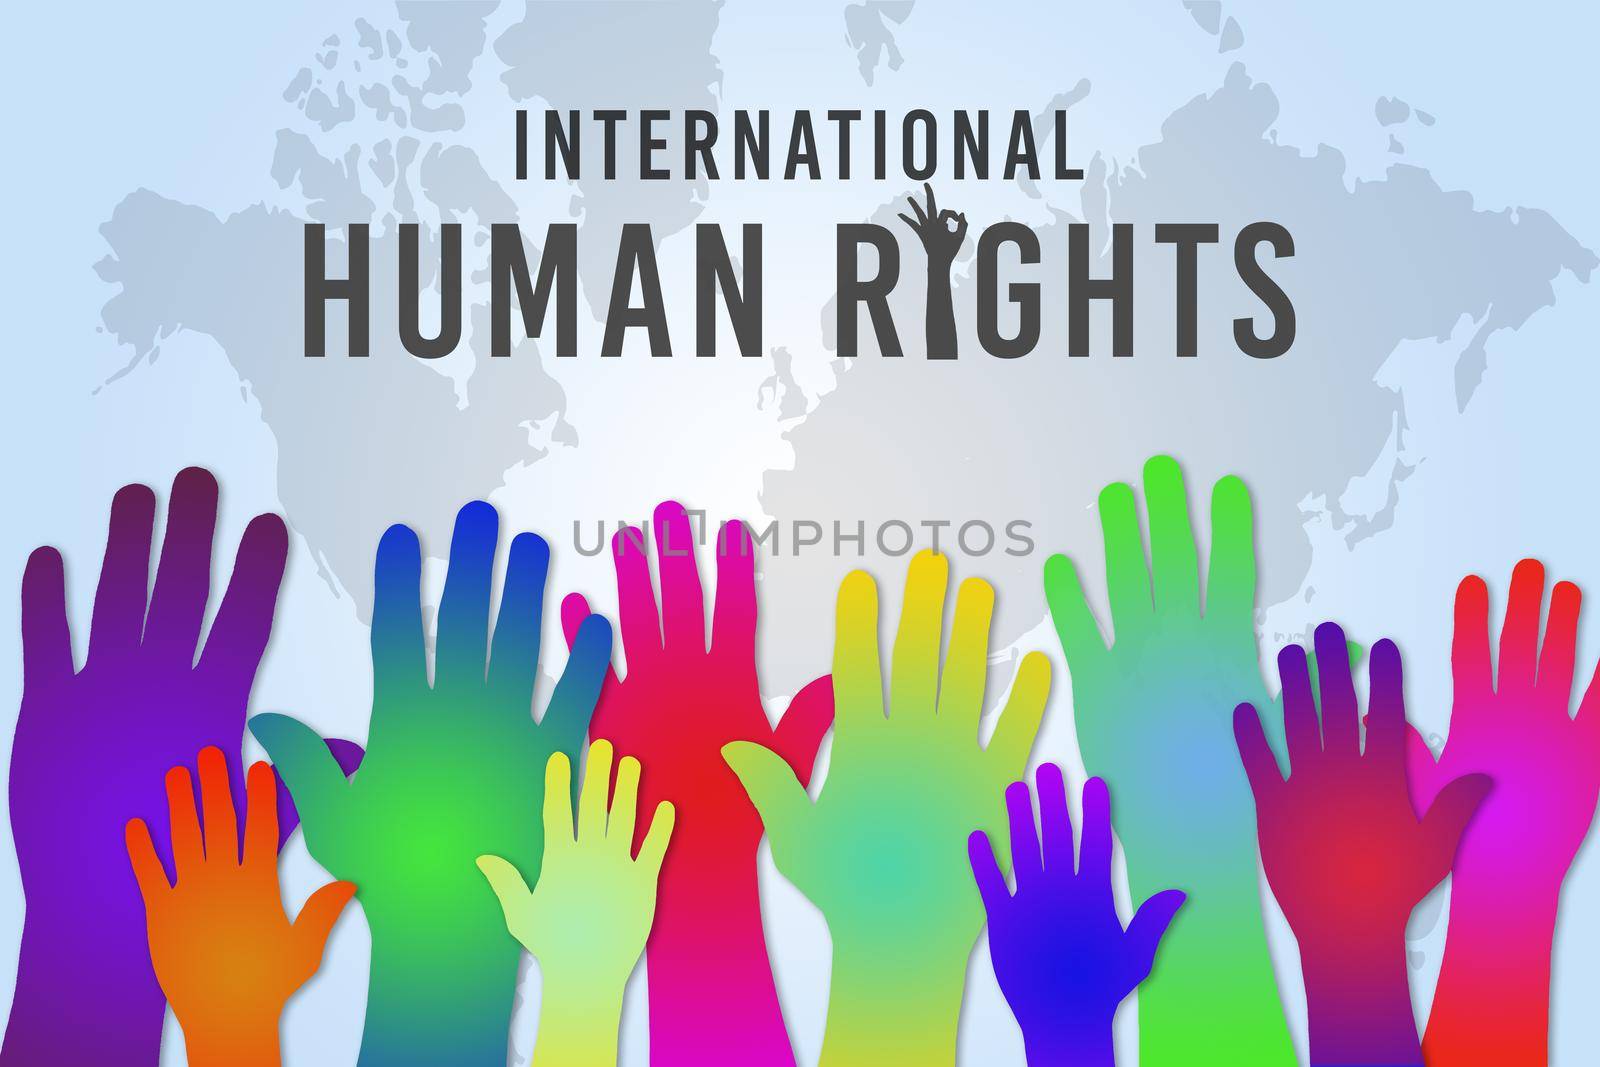 International Human Rights Day concept, raise hand up - illustration